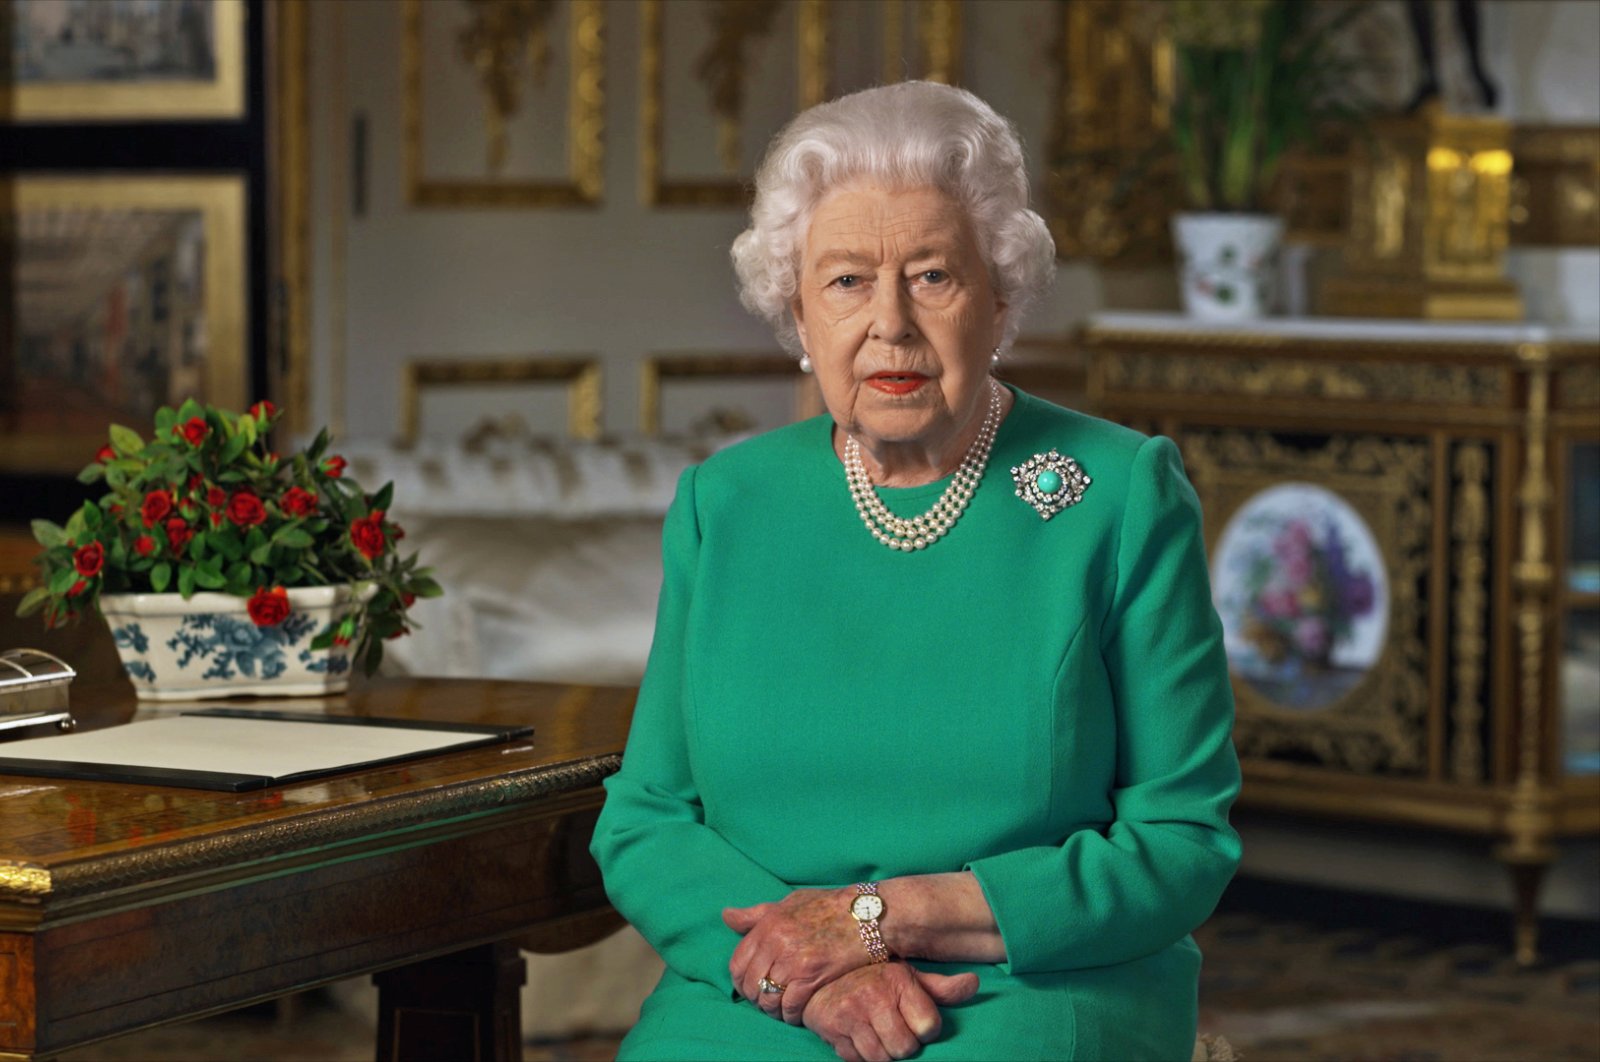 Buckingham Palace handout image of Britain's Queen Elizabeth during her address to the nation and the Commonwealth in relation to the coronavirus epidemic (COVID-19), recorded at Windsor Castle, Britain, April 5, 2020. (Reuters Photo)